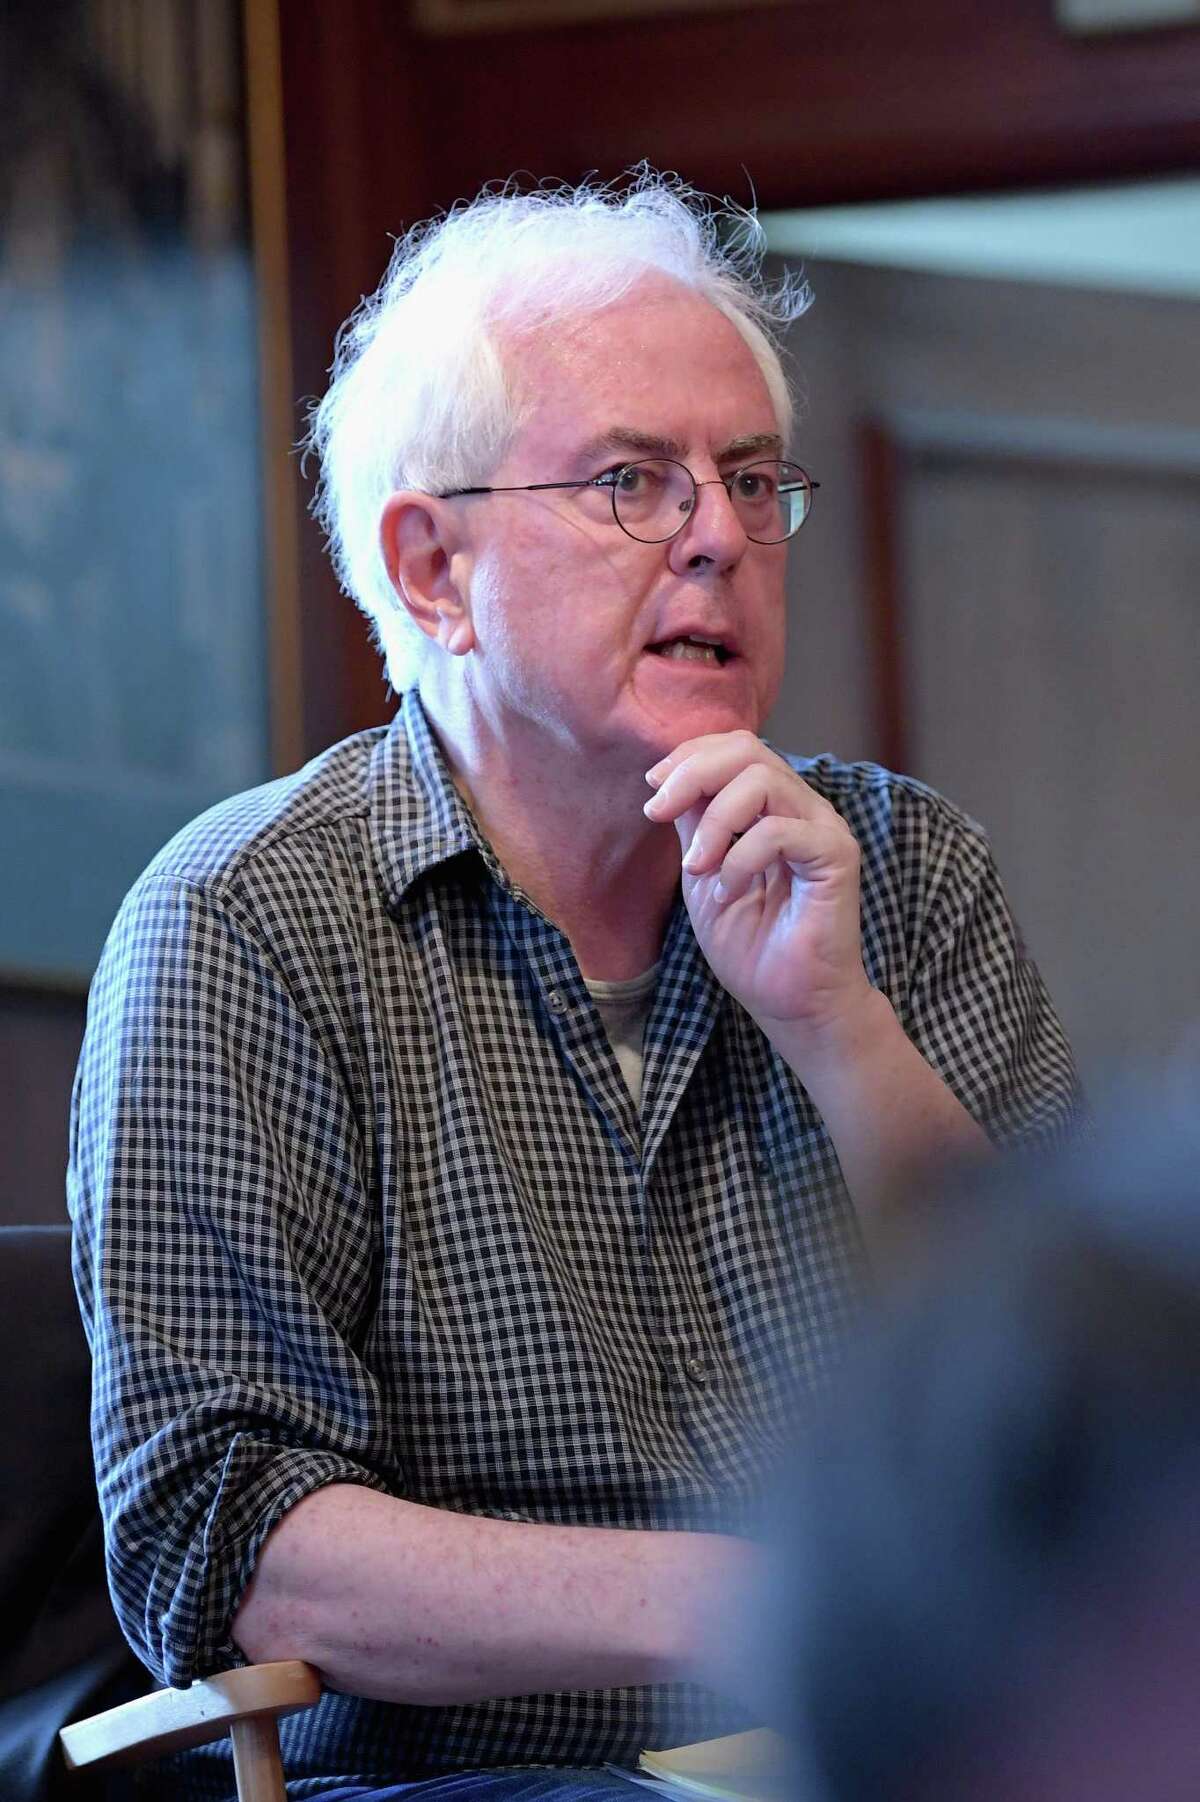 Hearst Connecticut film critic Joe Meyers participates in a discussion during the Film Review Panel during the Greenwich International Film Festival, Day 2 on June 2, 2017 in Greenwich, Connecticut.